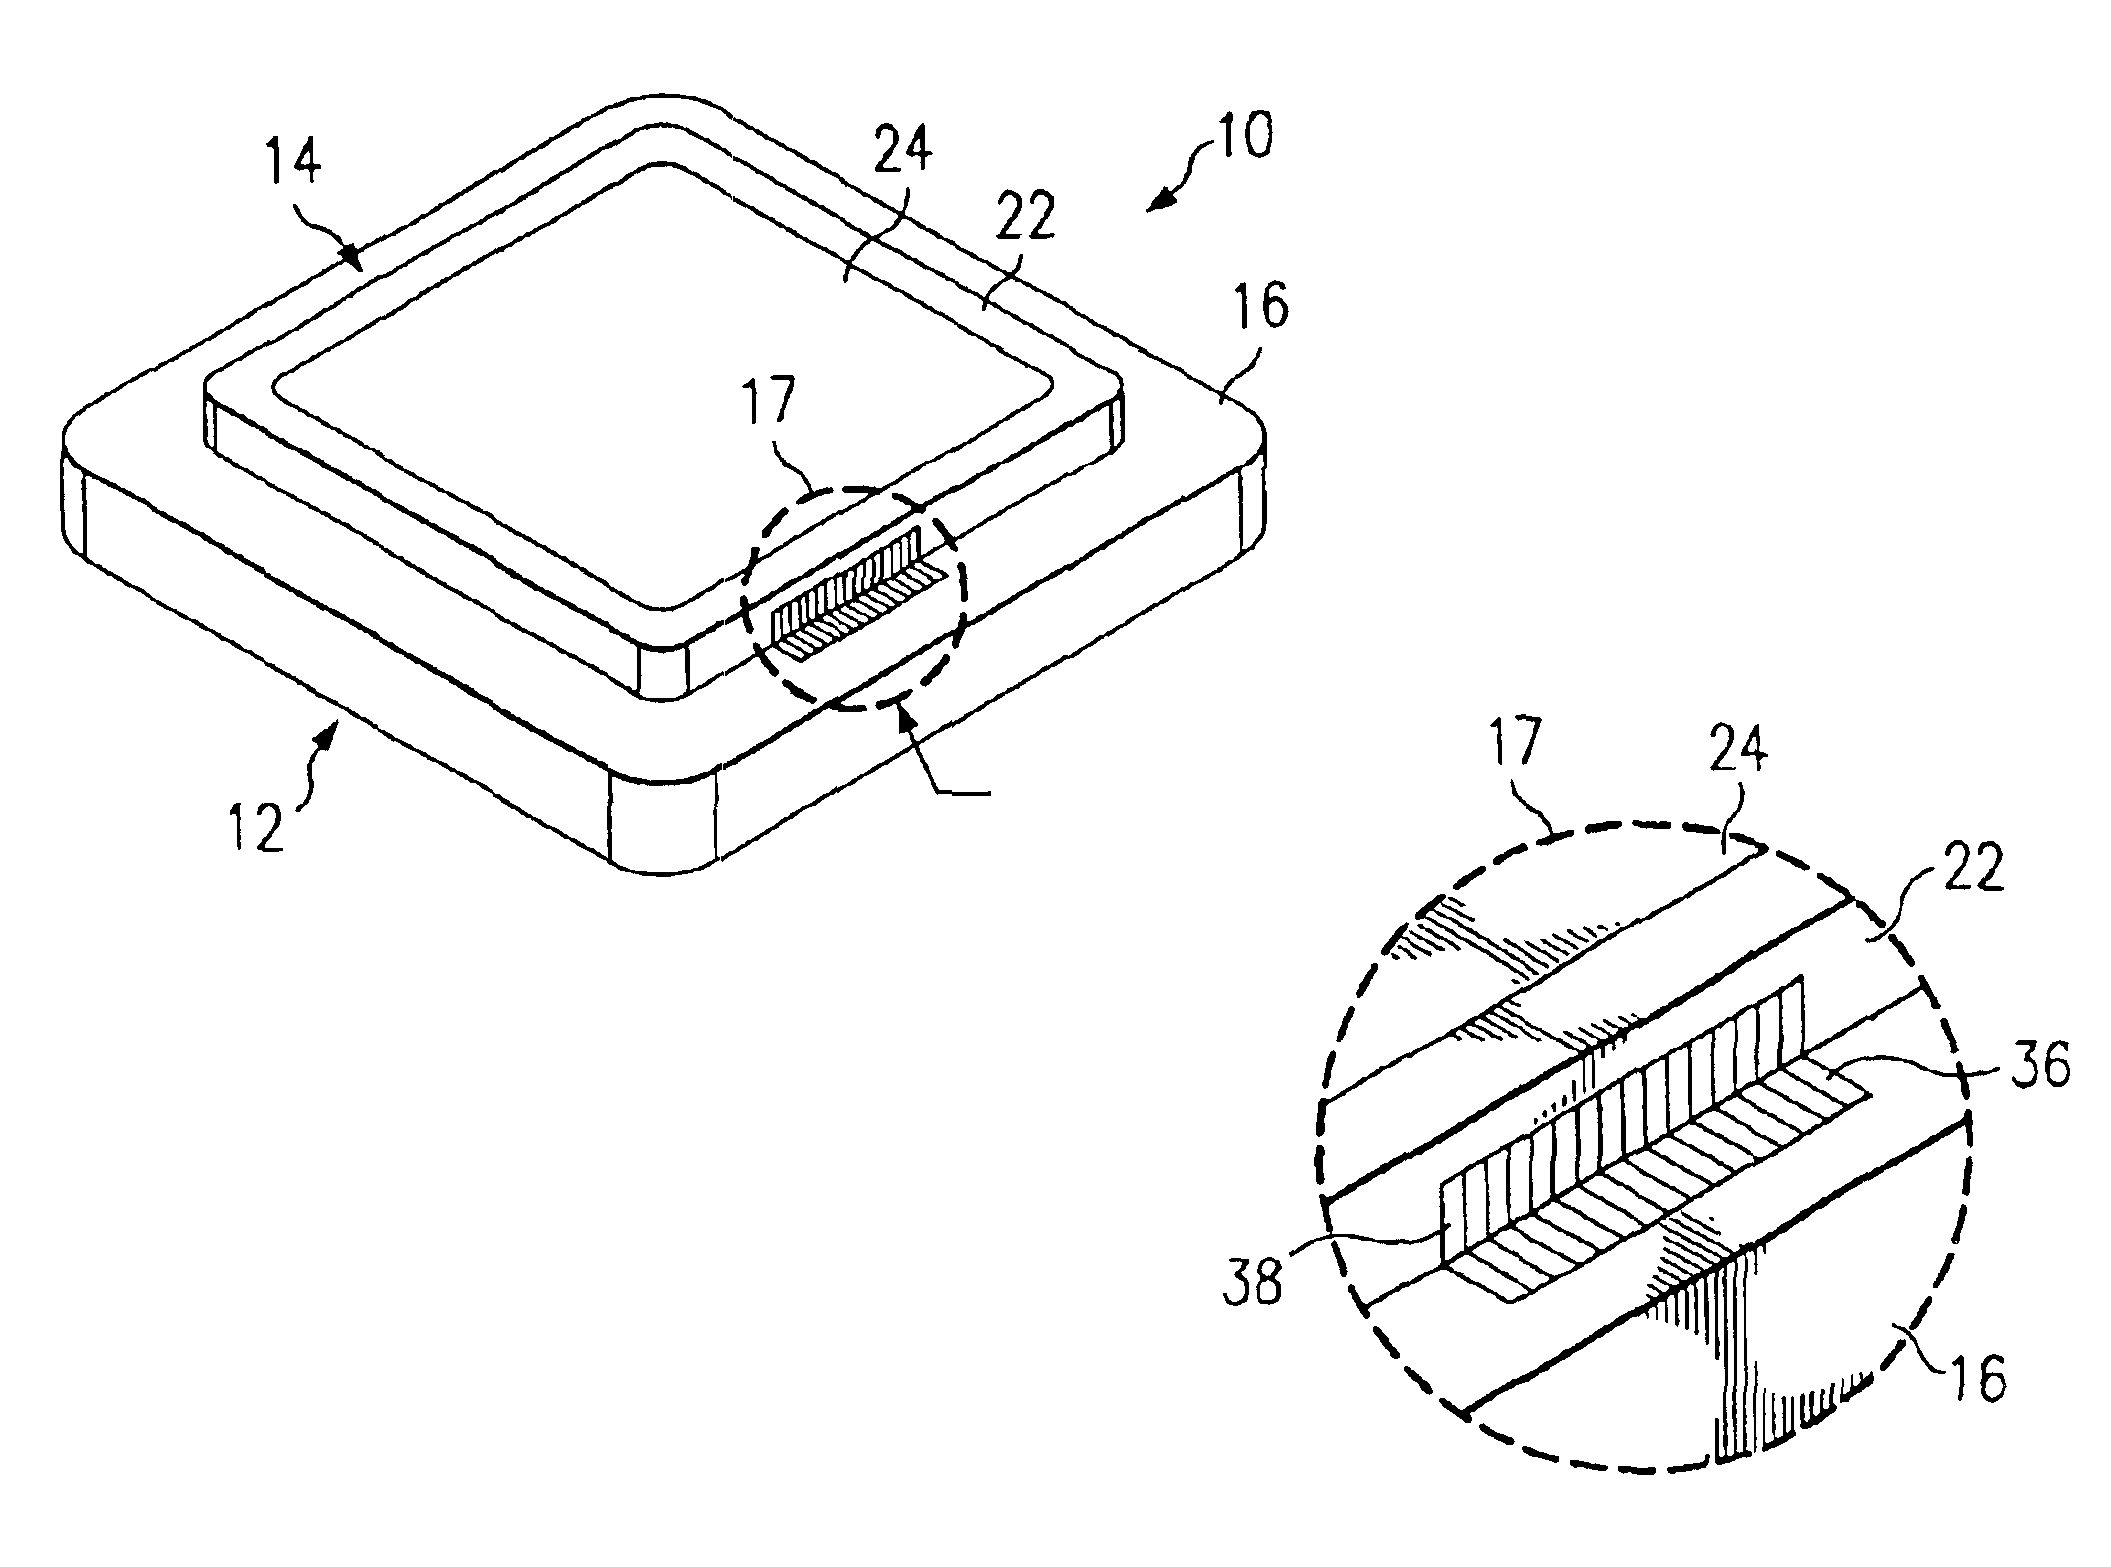 Method for constructing a photomask assembly using an encoded mark